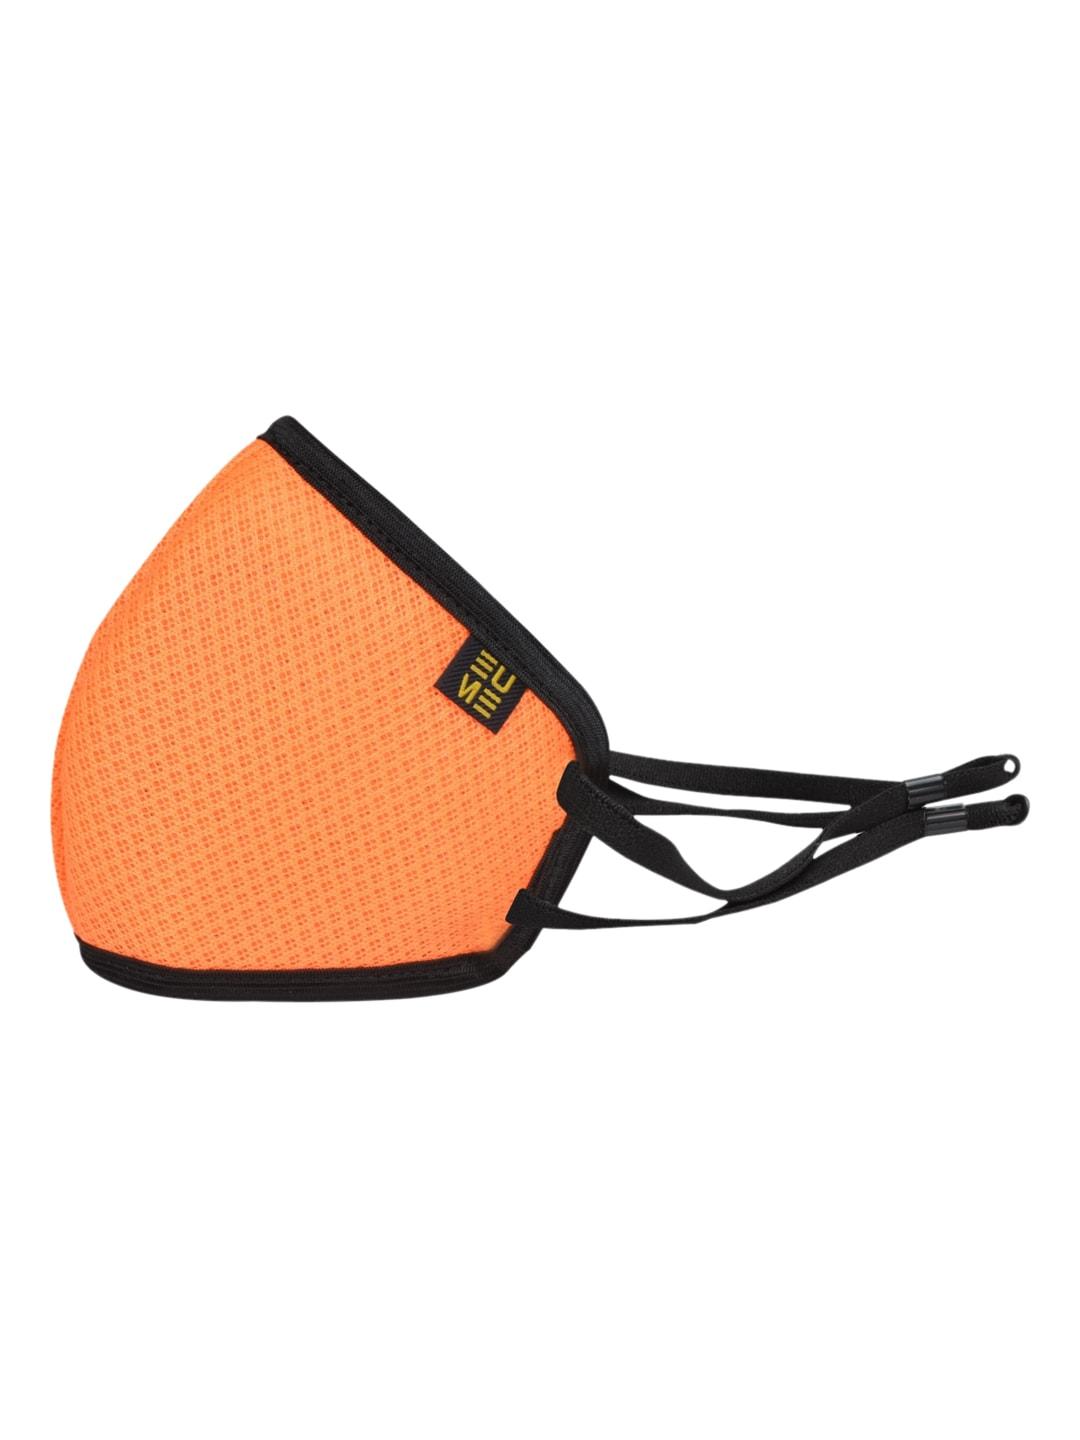 eume orange solid 3 ply protective outdoor mask